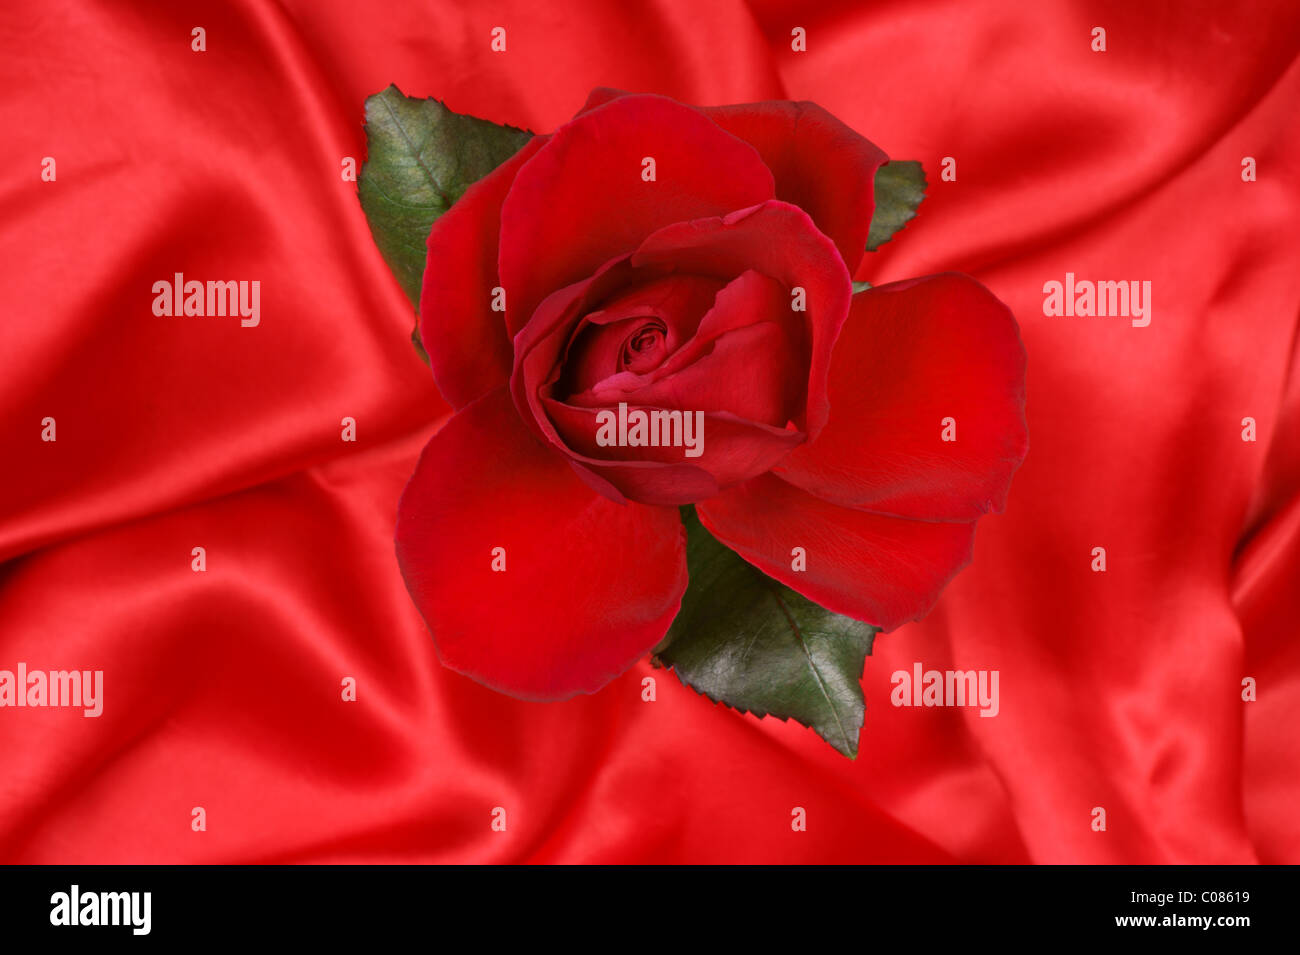 Beautiful red rose over a red silky fabric background Stock Photo